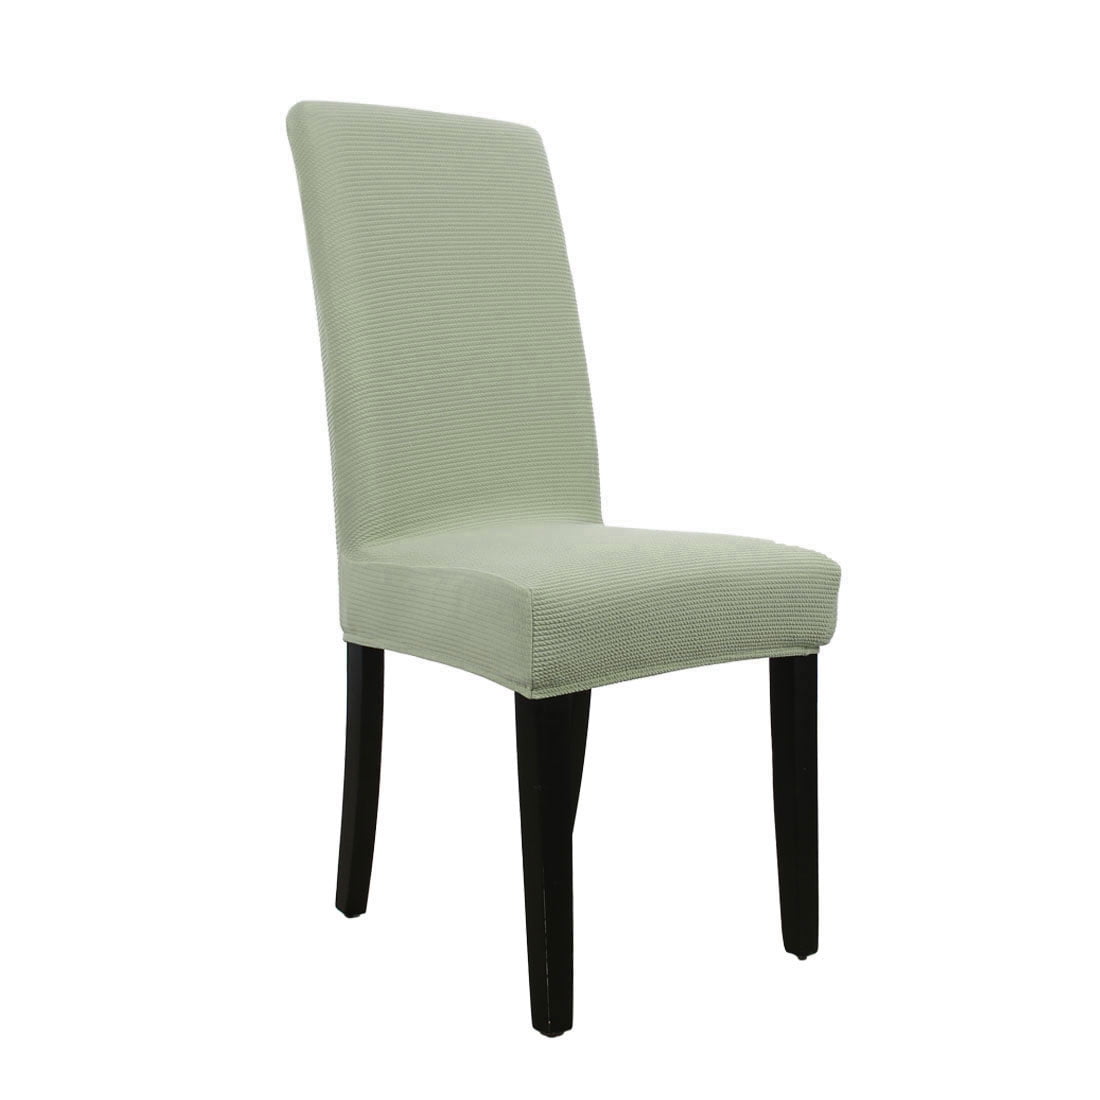 Unique Bargains Stretch Knitted Dining Room Chair Cover